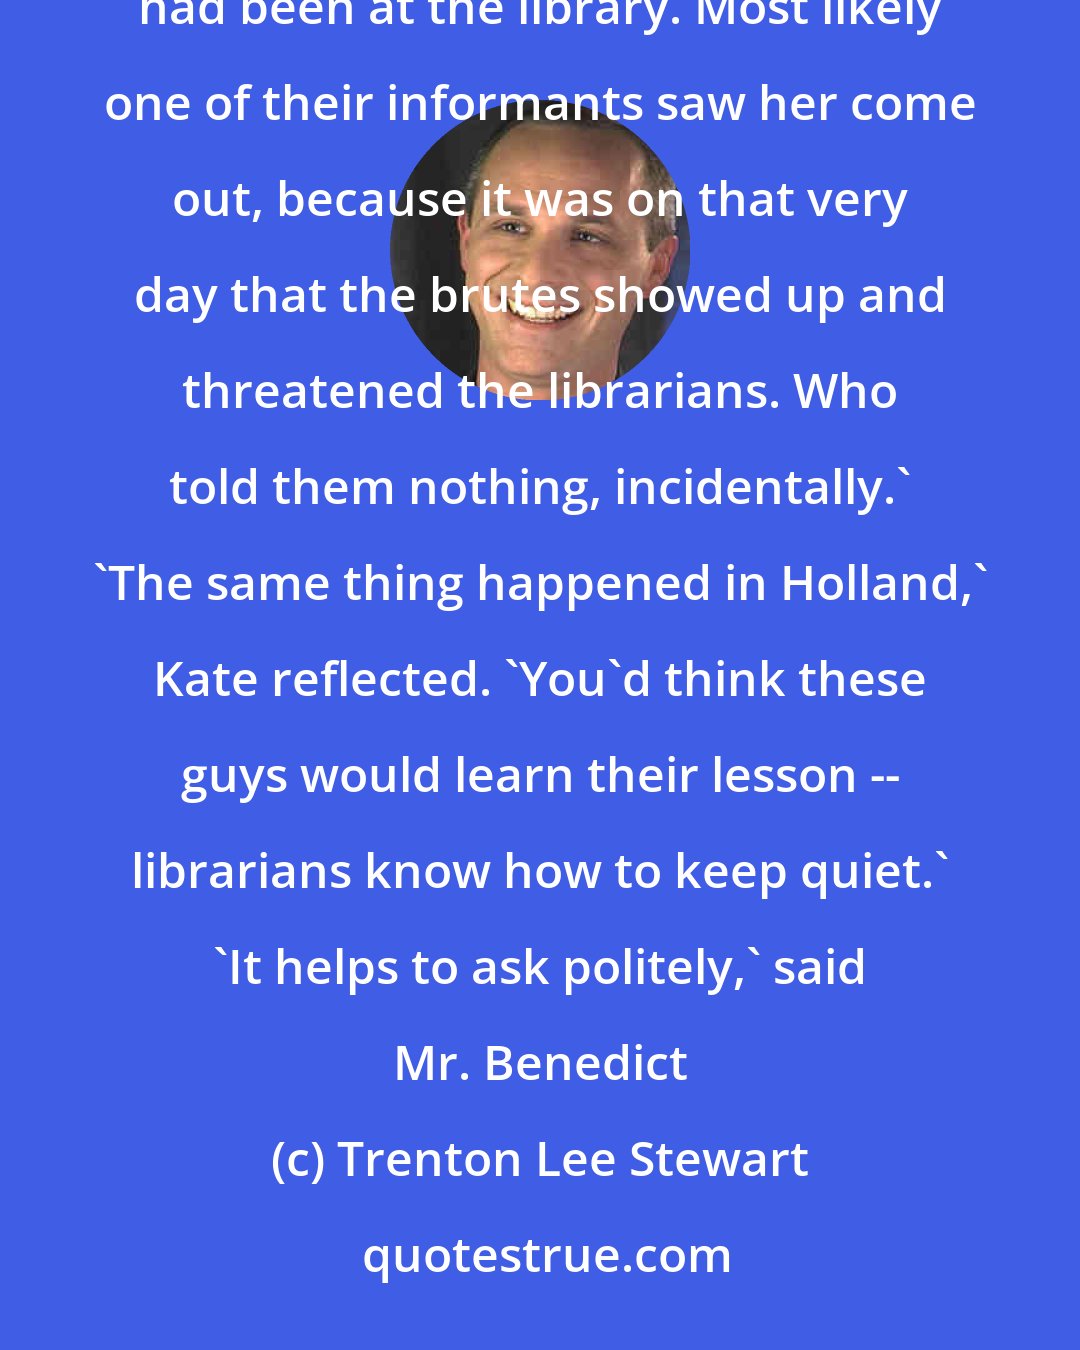 Trenton Lee Stewart: Somhow those Ten Men -- at the time they were called Recruiters, of course -- discovered that Constance had been at the library. Most likely one of their informants saw her come out, because it was on that very day that the brutes showed up and threatened the librarians. Who told them nothing, incidentally.' 'The same thing happened in Holland,' Kate reflected. 'You'd think these guys would learn their lesson -- librarians know how to keep quiet.' 'It helps to ask politely,' said Mr. Benedict